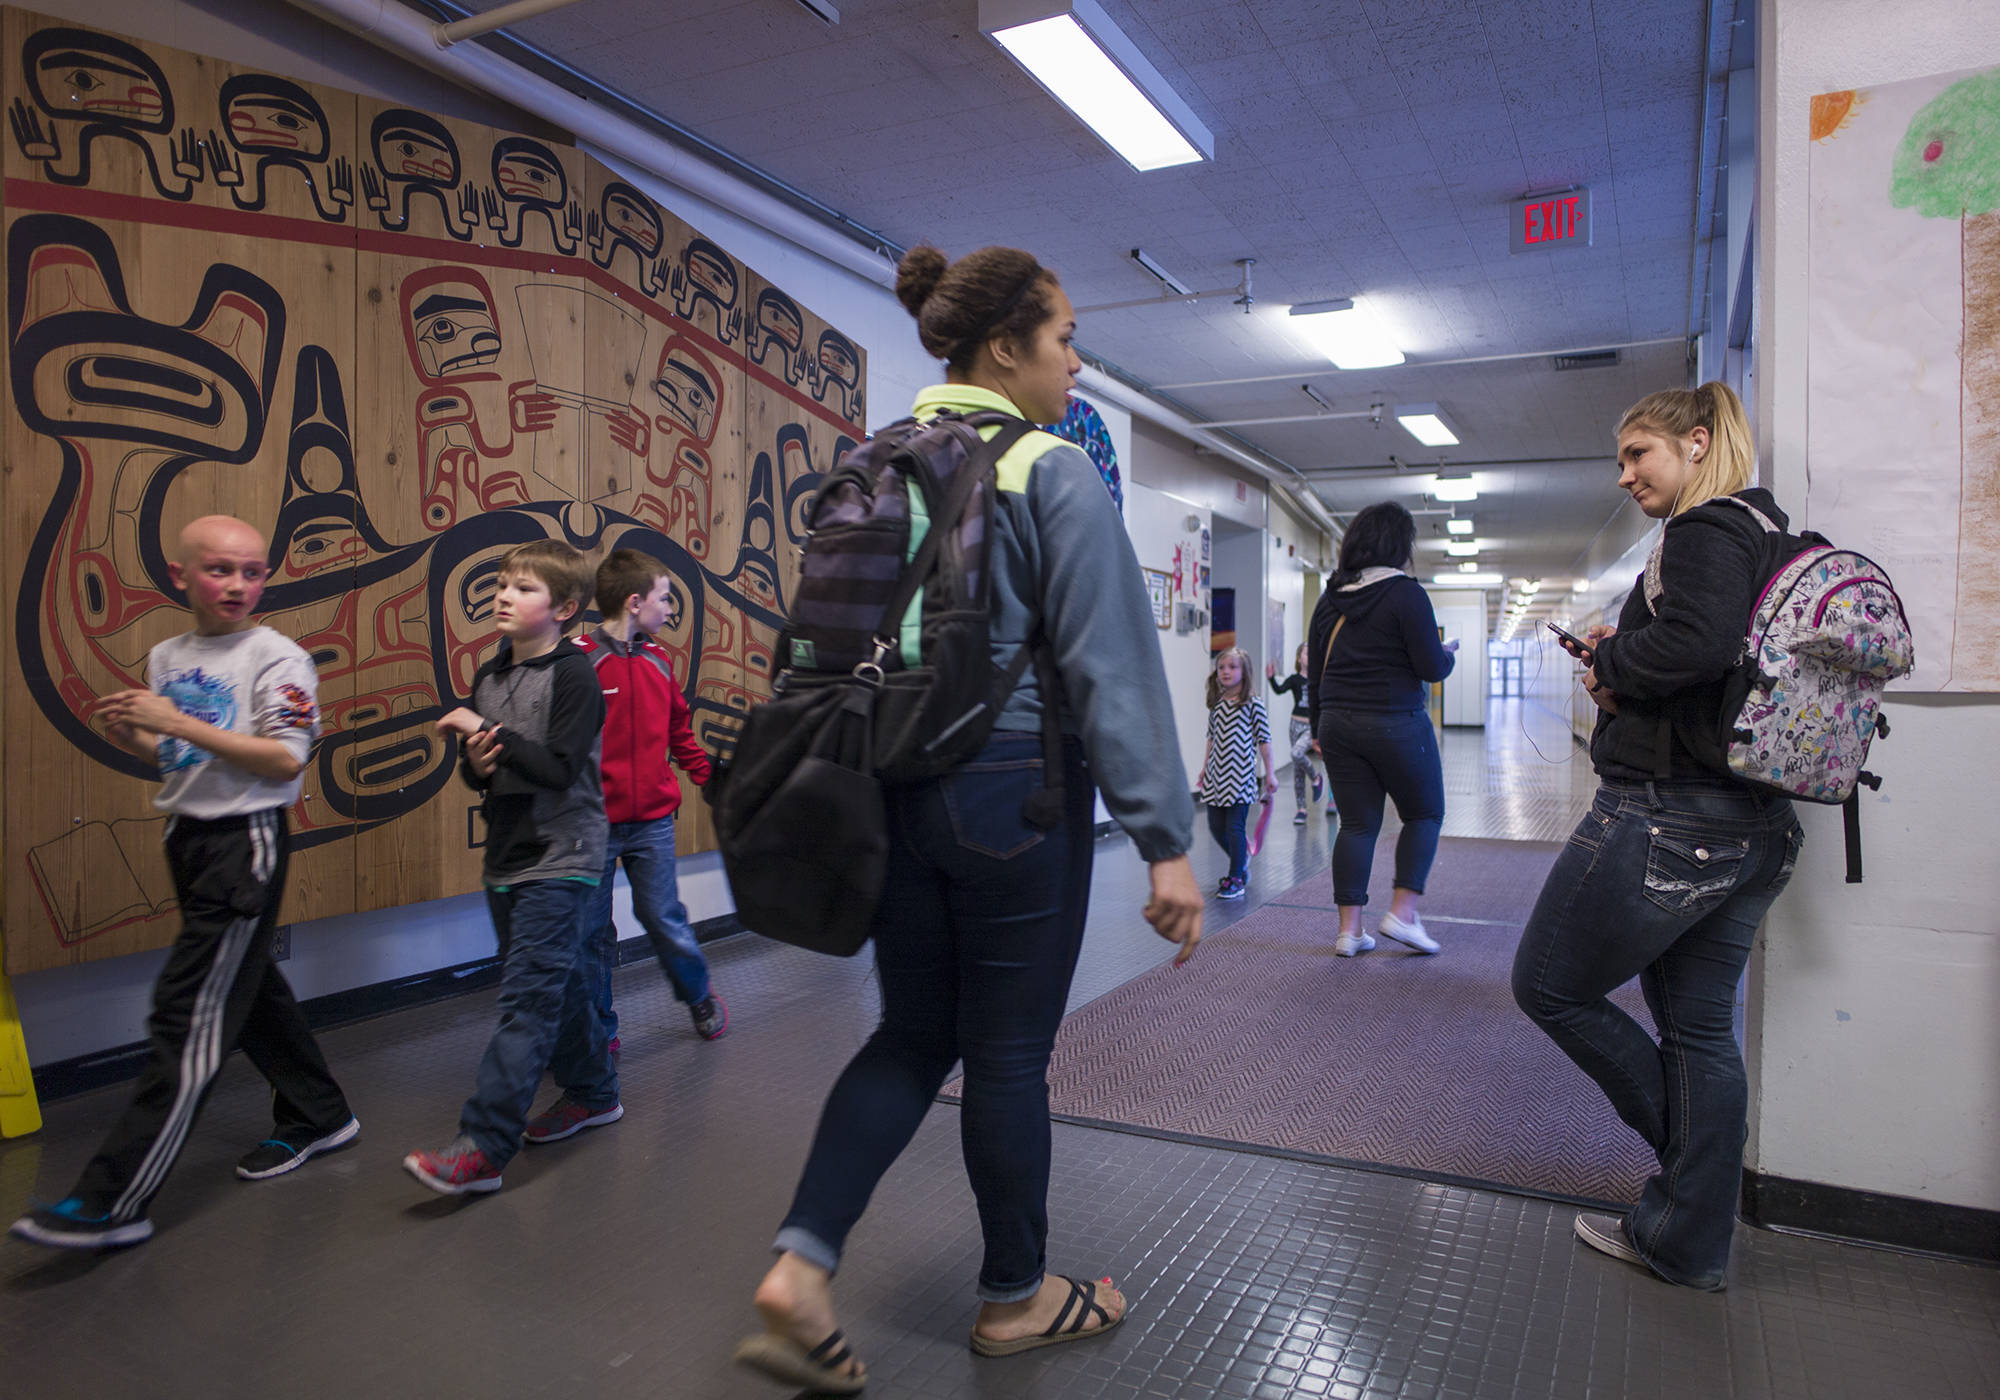 Students at Yaakoosgé Daakahídi Alternative High School prepare to leave the Marie Drake Building after school on May 25, 2015.